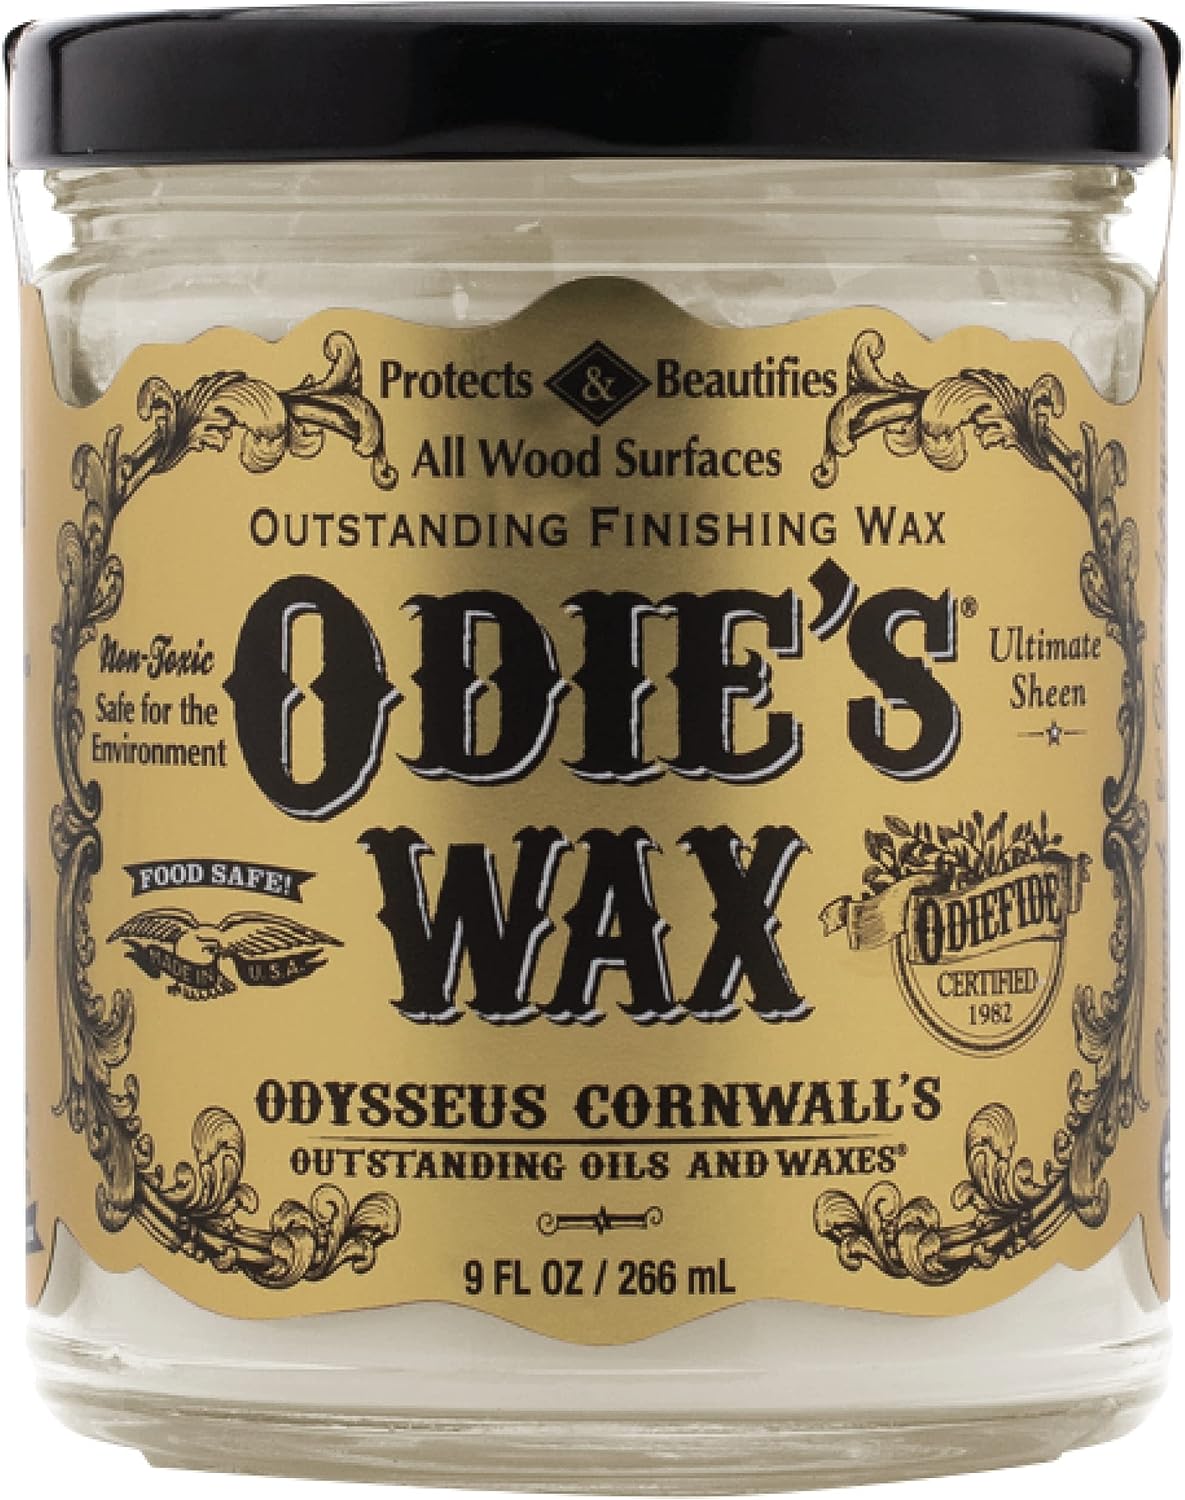 ODIE'S Wax •Super Hard Wax for Wood •Works with Odie's Oil •Odie's Super Duper Oil and Odie's Wood Butter for Extra Lustrous Sheen •Protection and Durability •9 Ounce Glass Jar